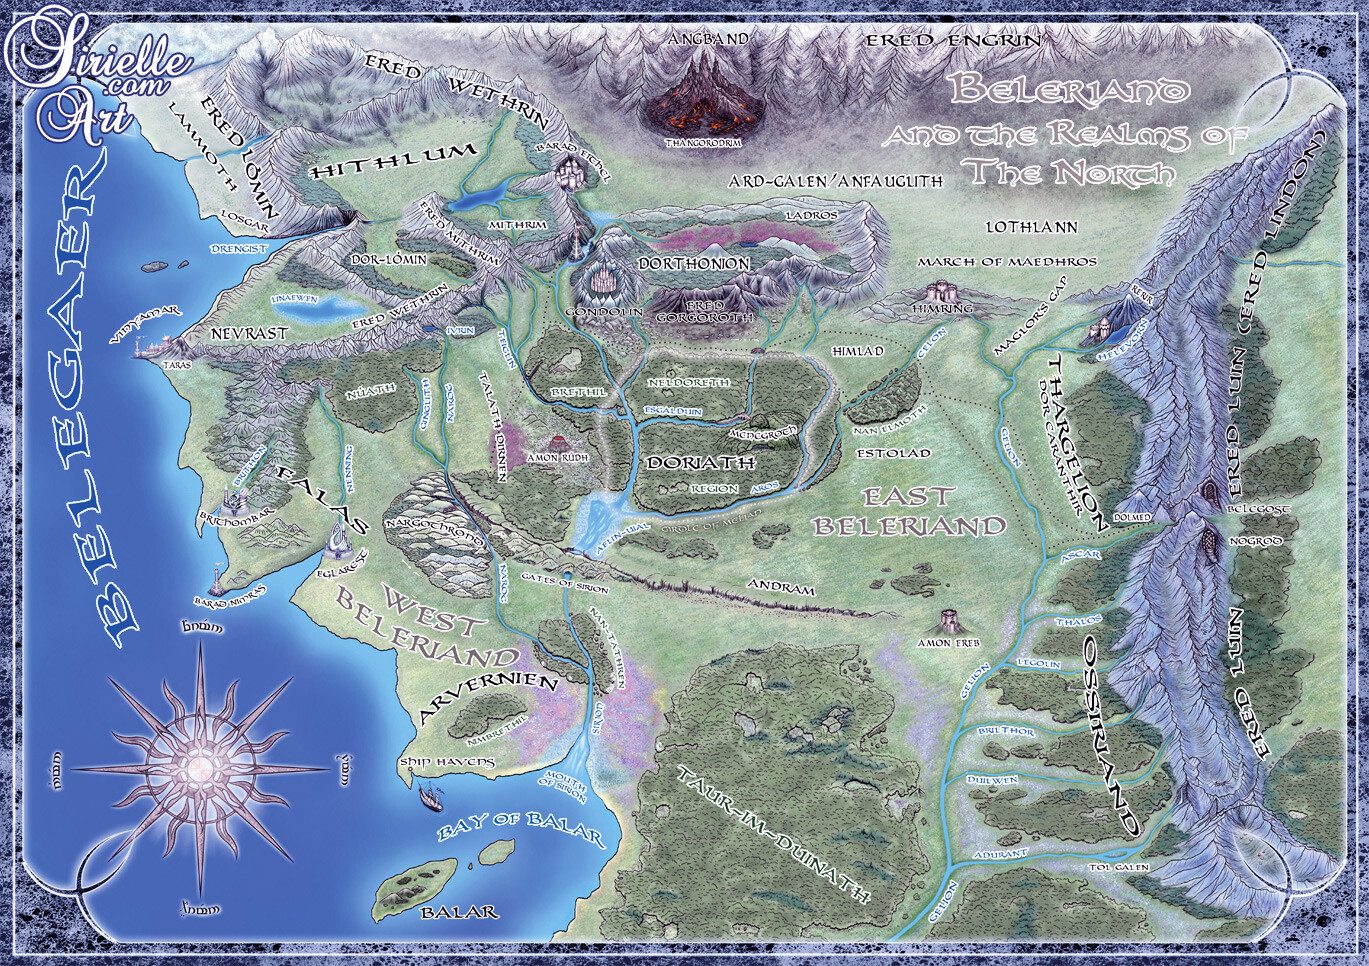 Beleriand and Realms of The North | Map rendering by myself, with Thangorodrim &amp; compass rose by Kuba Tymiński 'Ominous'.